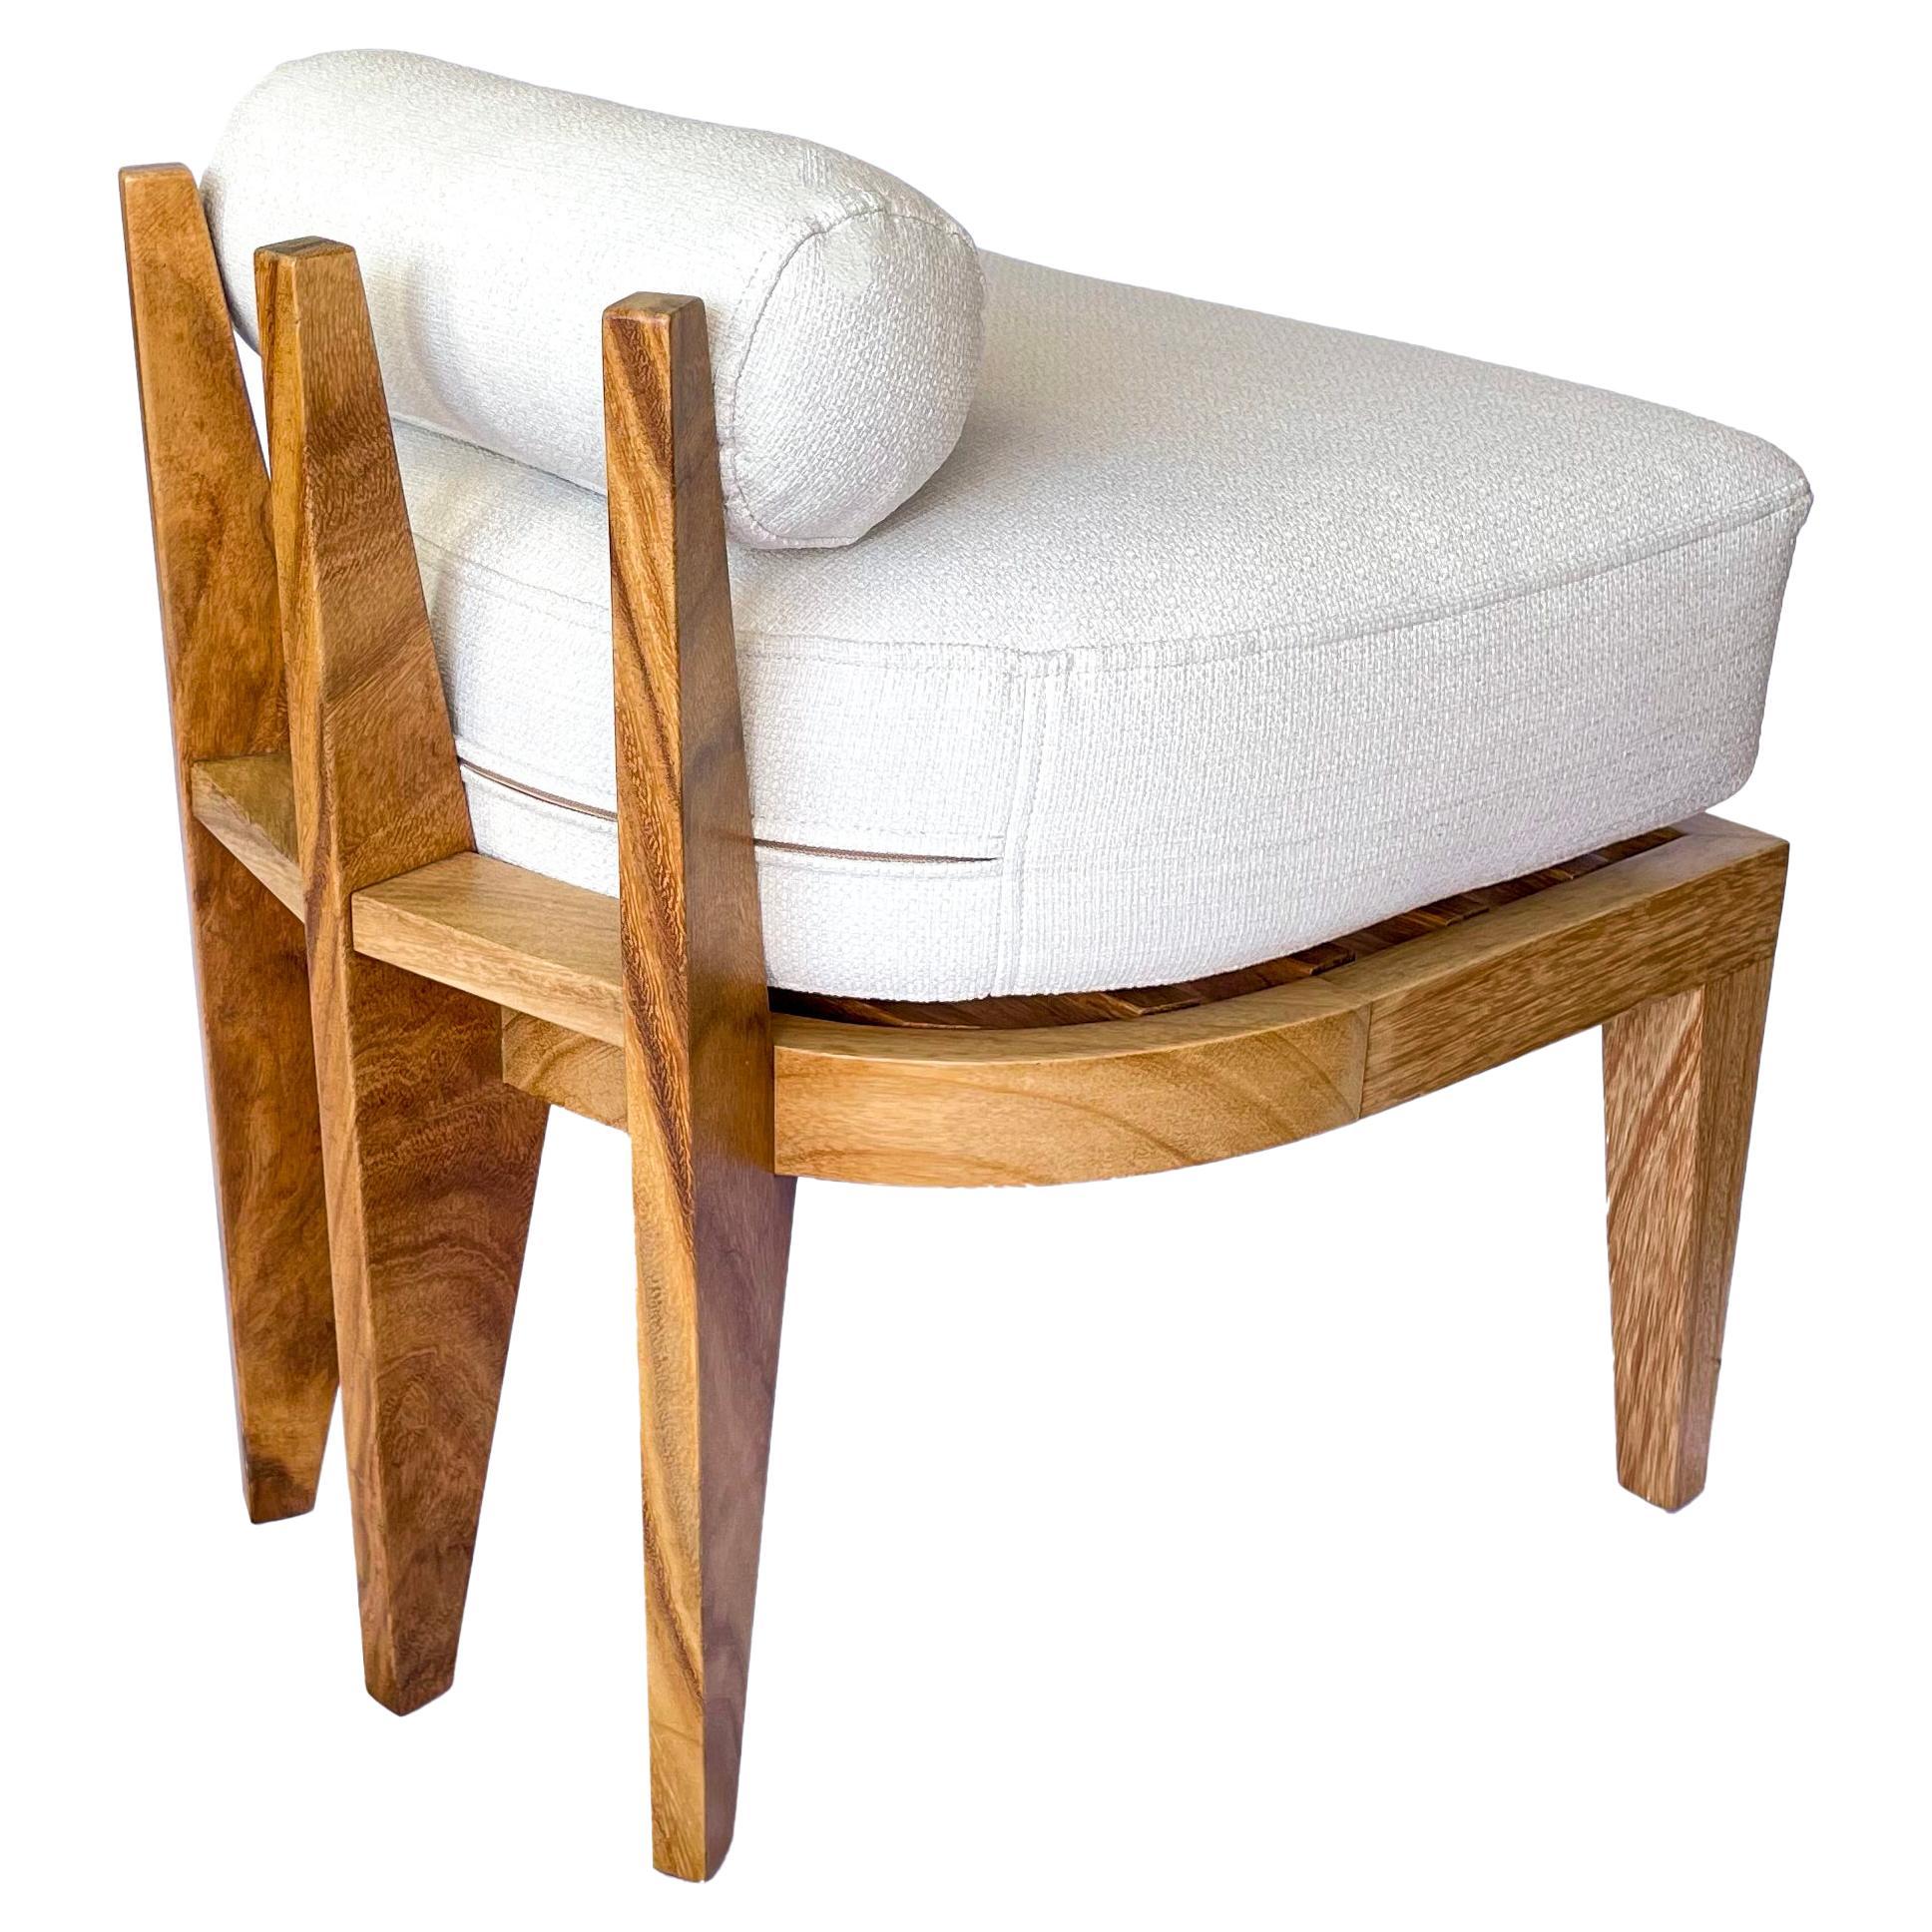 Guatemalan Modern Wood Stool by Pierre Sarkis For Sale